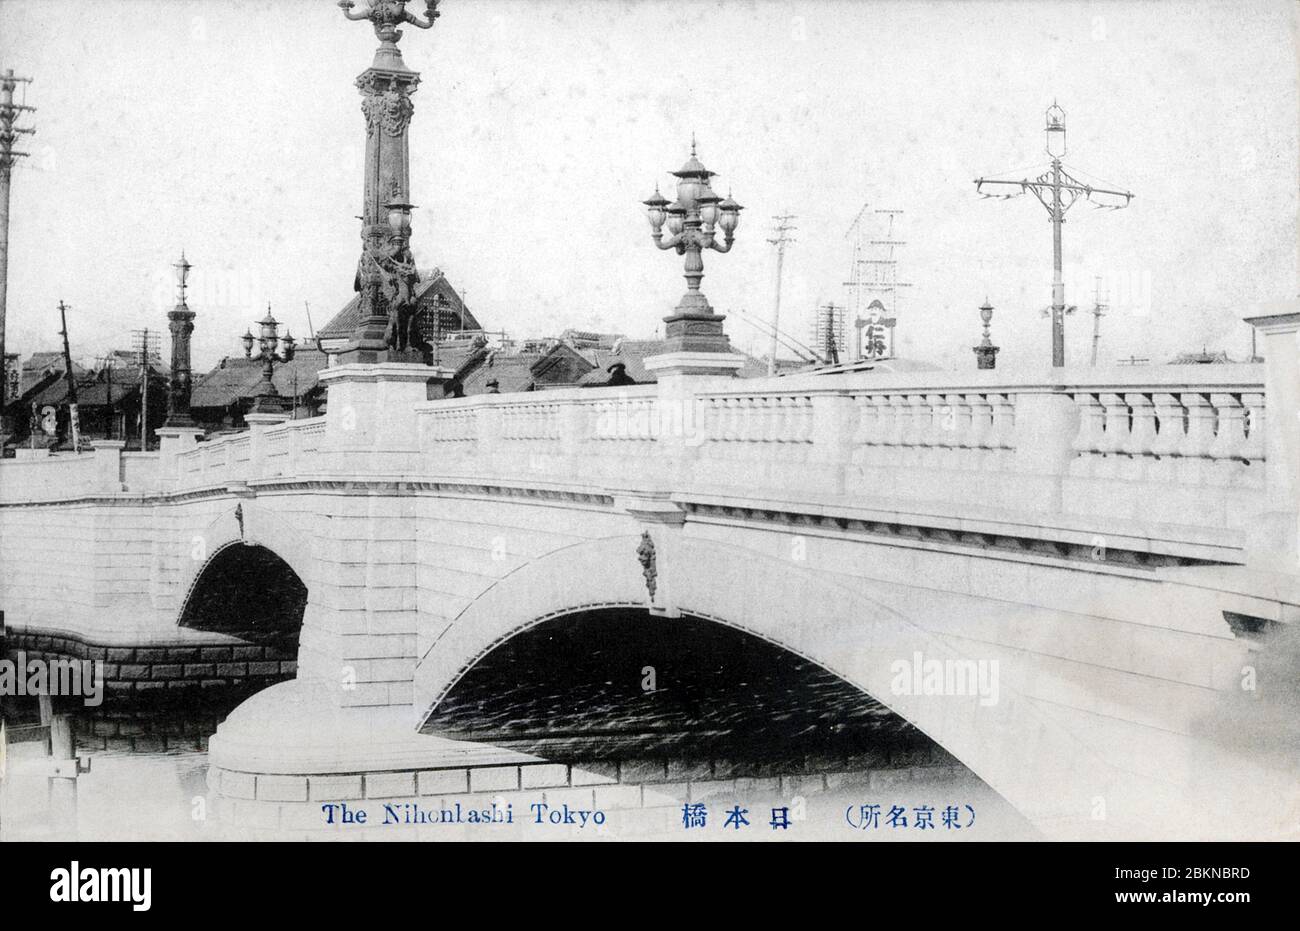 [ 1910s Japan - Nihonbashi Bridge in Tokyo ] —   Nihonbashi Bridge in Tokyo, designed by Yorinaka Tsumaki (妻木頼黄, 1859-1916).  During the Edo Period (1600-1867), the bridge was the starting point of the famous Tokaido and the other 4 post roads. The stone bridge with bronze lions and wrought-iron gas lamps replaced the wooden one in 1911 (Meiji 44).  Now hidden below an ugly highway, it is one of only two surviving Meiji-era bridges in Tokyo.  20th century vintage postcard. Stock Photo